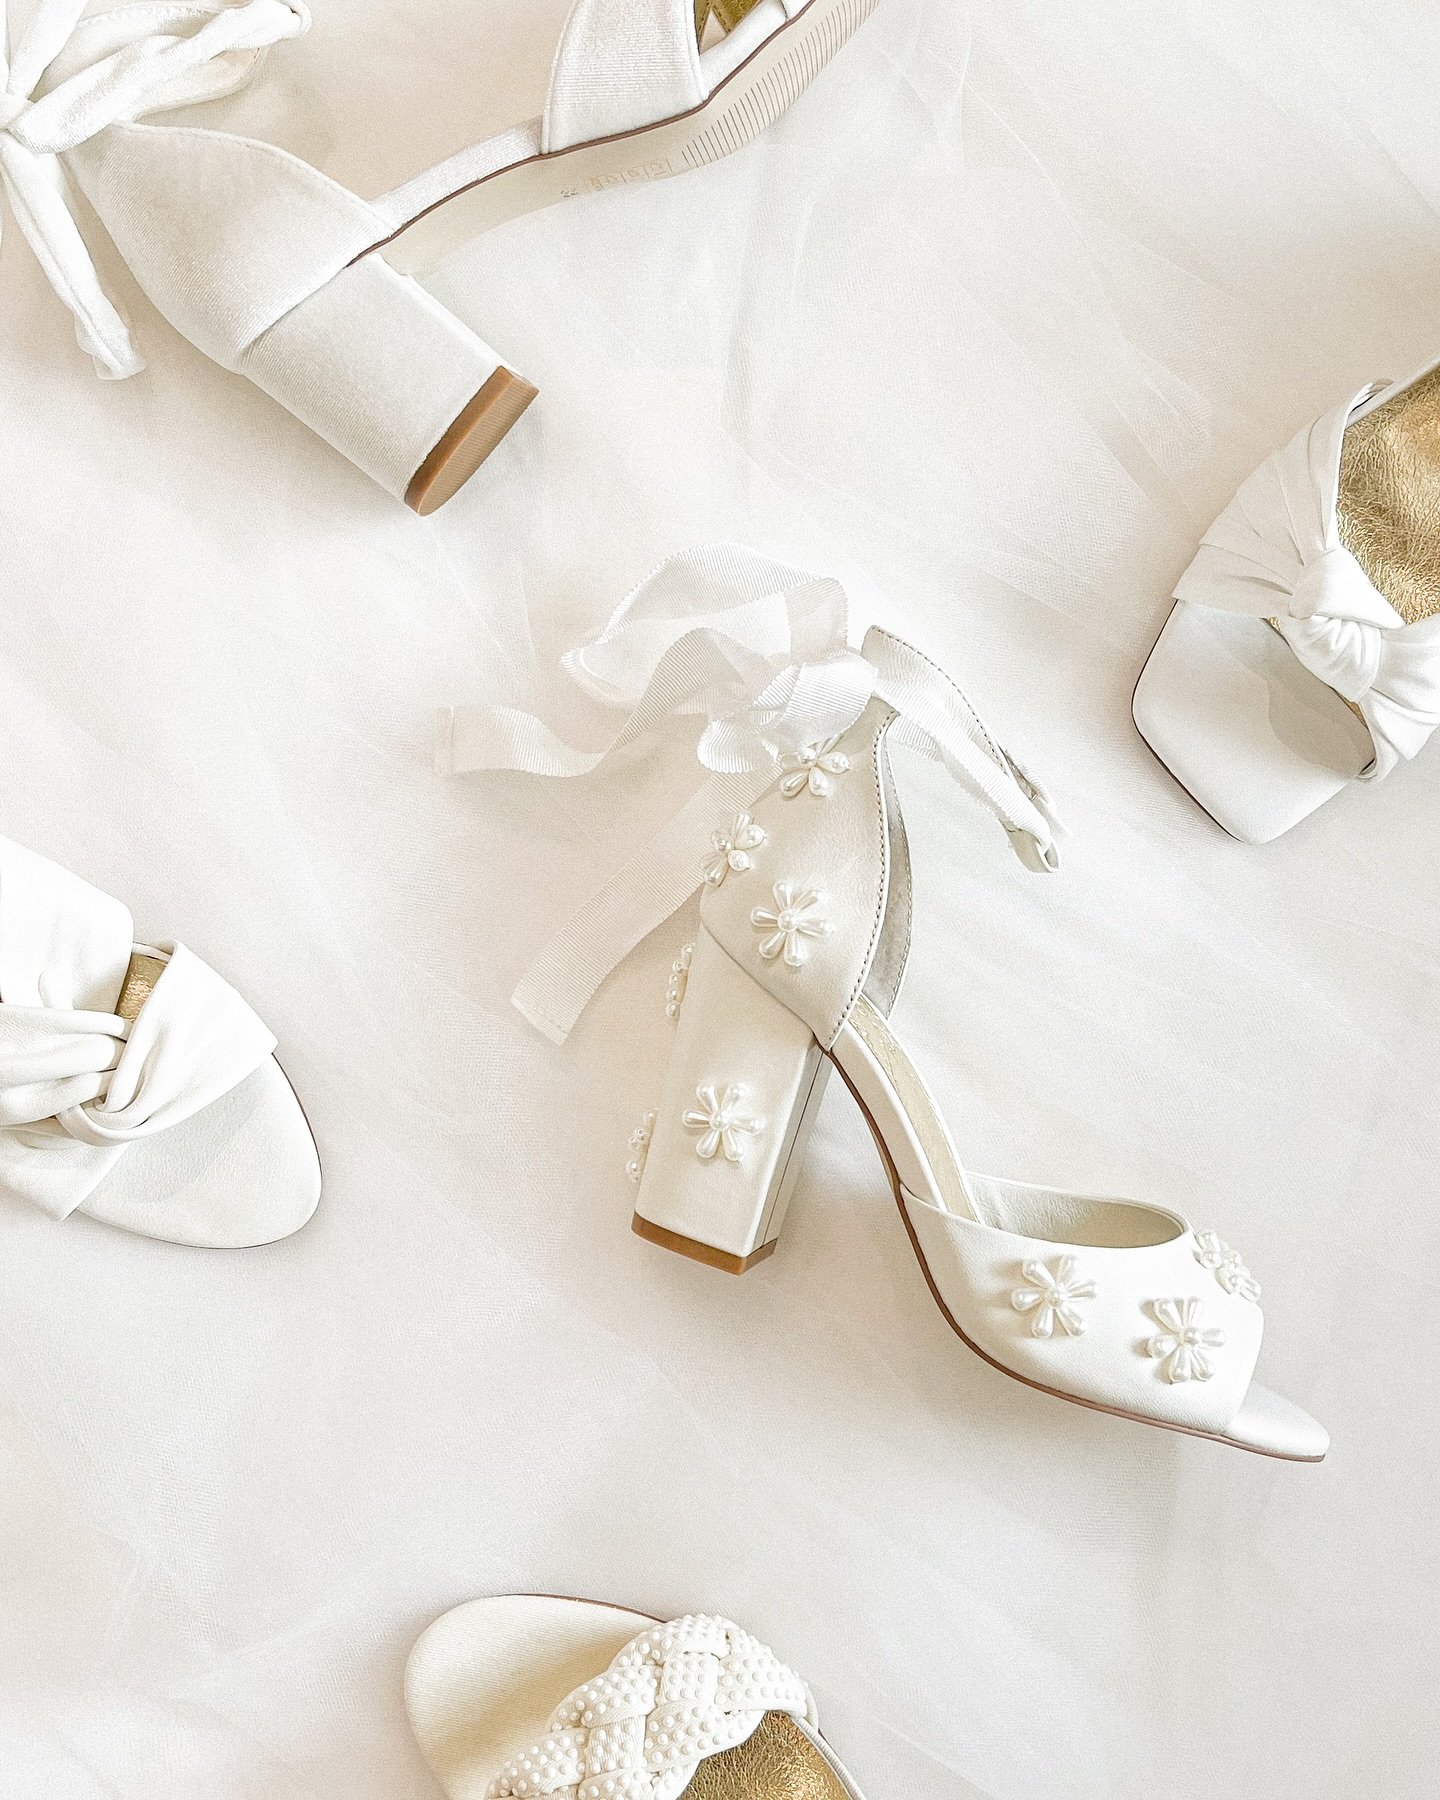 Pearly Whites 🤍

Discover our bridal heels available in-store at @ellejamesbridal ✨ // Tuesday - Friday 10am-5pm